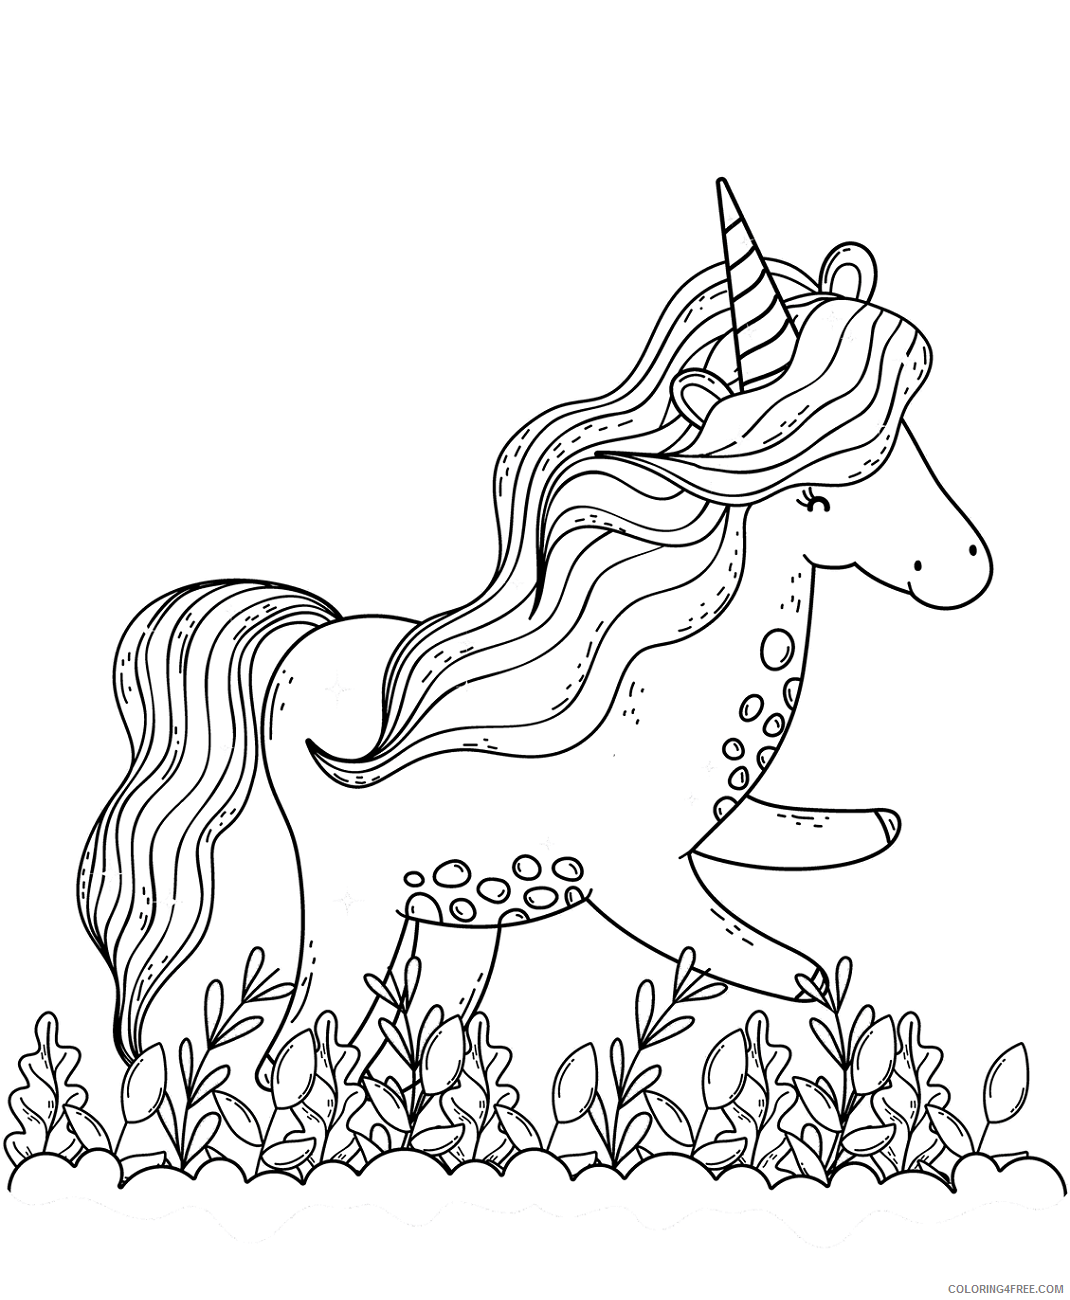 Unicorn Coloring Pages unicorn_having_fun Printable 2021 6055 Coloring4free